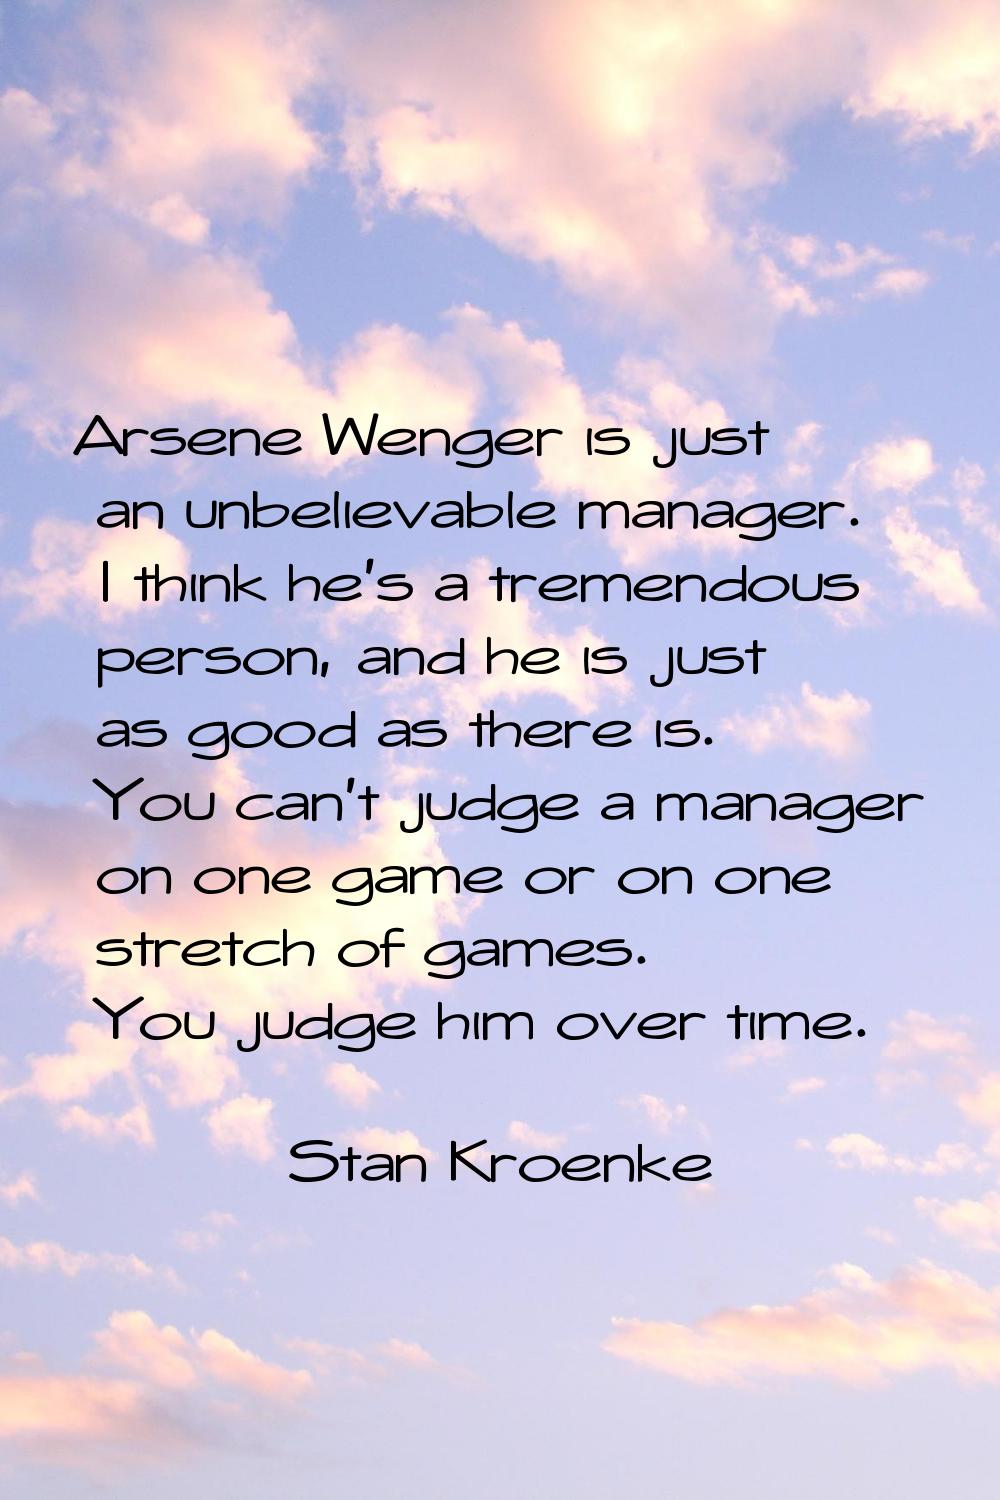 Arsene Wenger is just an unbelievable manager. I think he's a tremendous person, and he is just as 